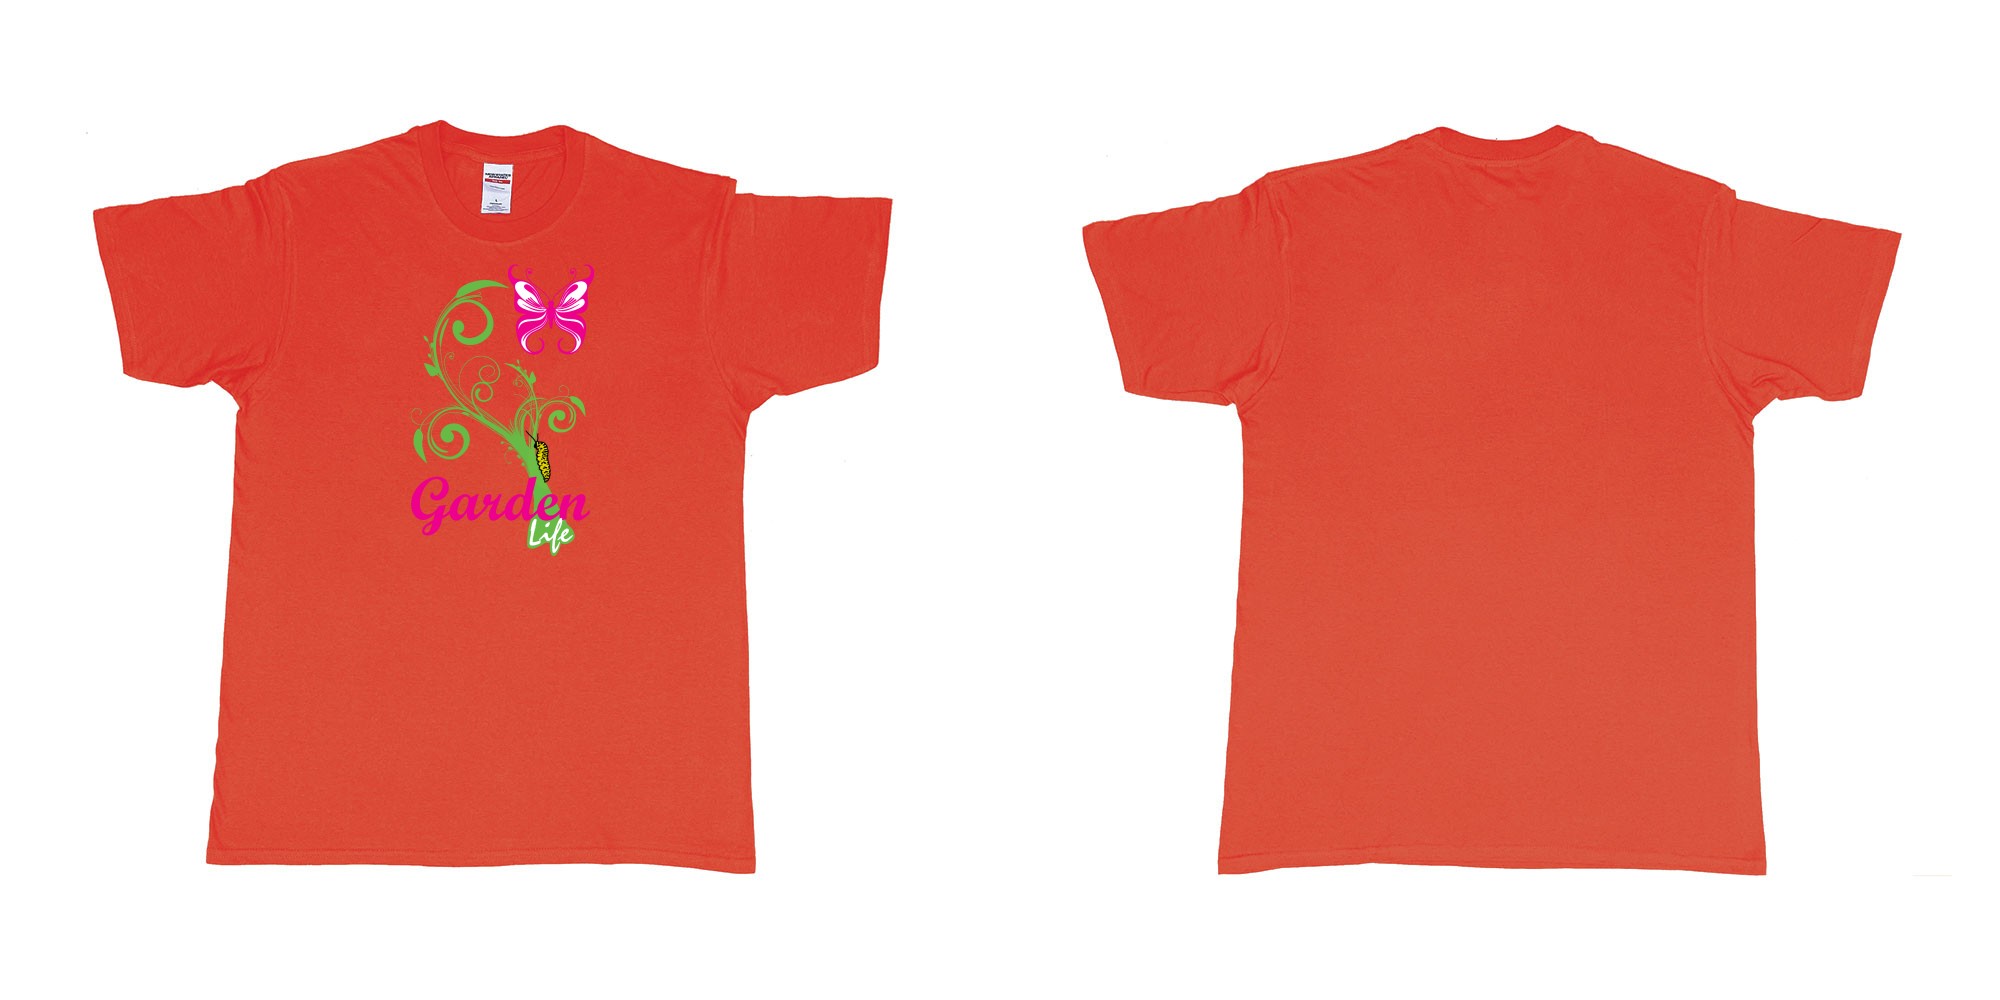 Custom tshirt design garden life transformation from a caterpillar and a butterfly in fabric color red choice your own text made in Bali by The Pirate Way